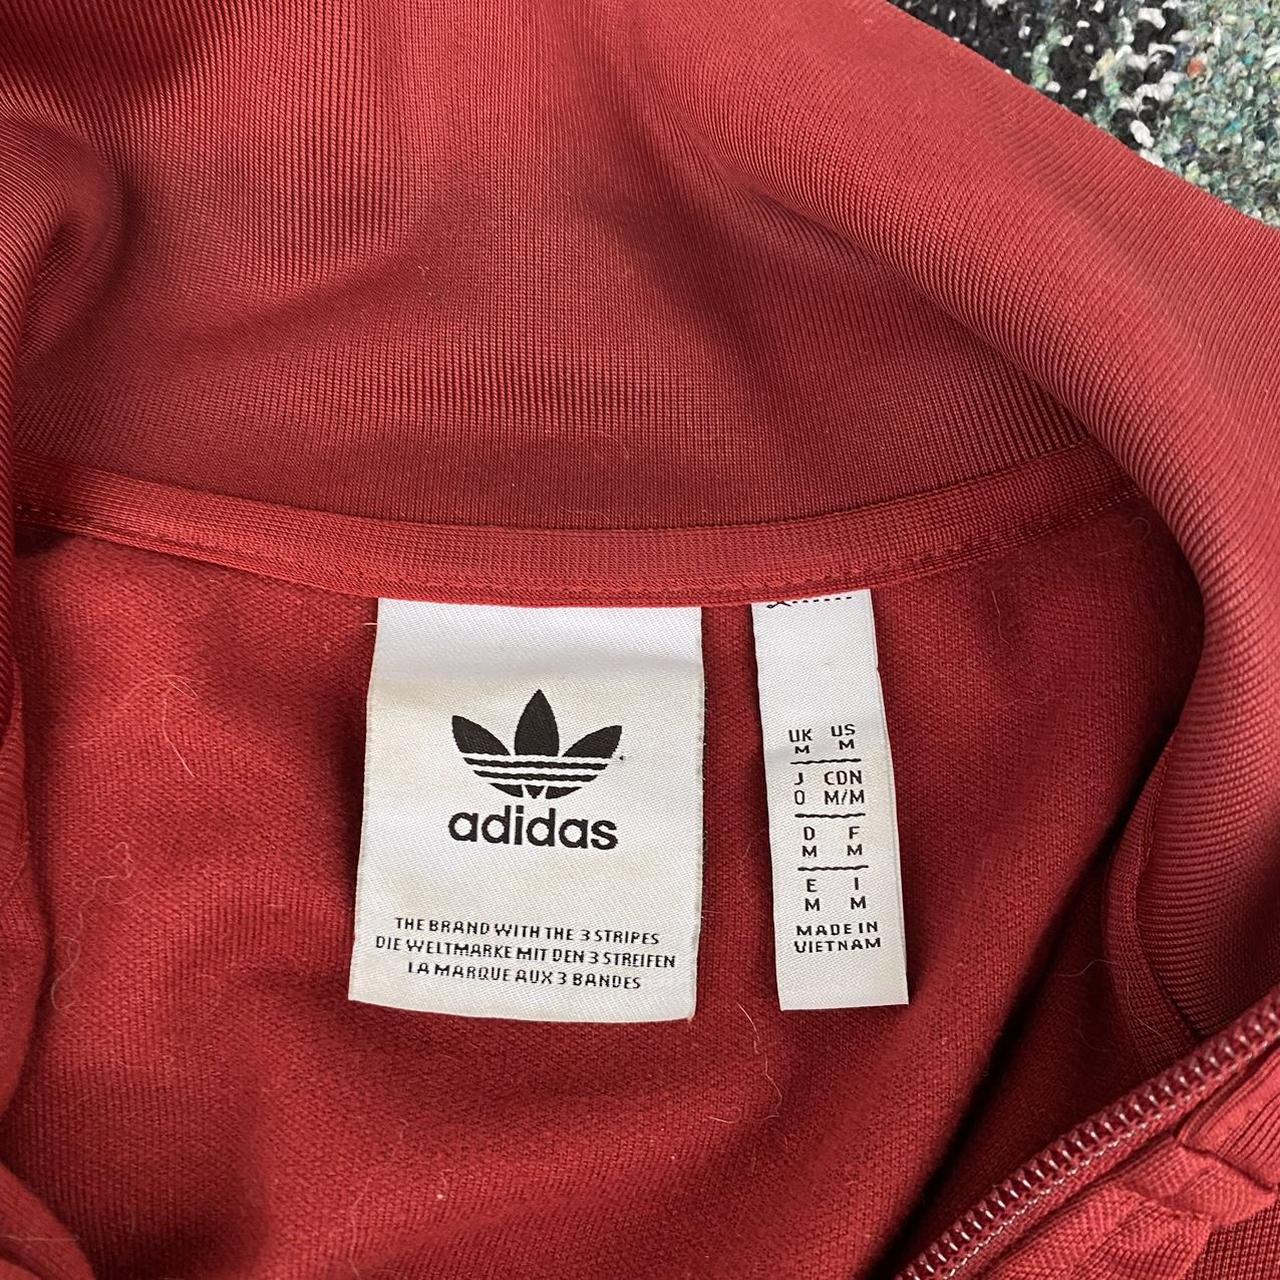 Adidas Men's Red and White Jacket | Depop